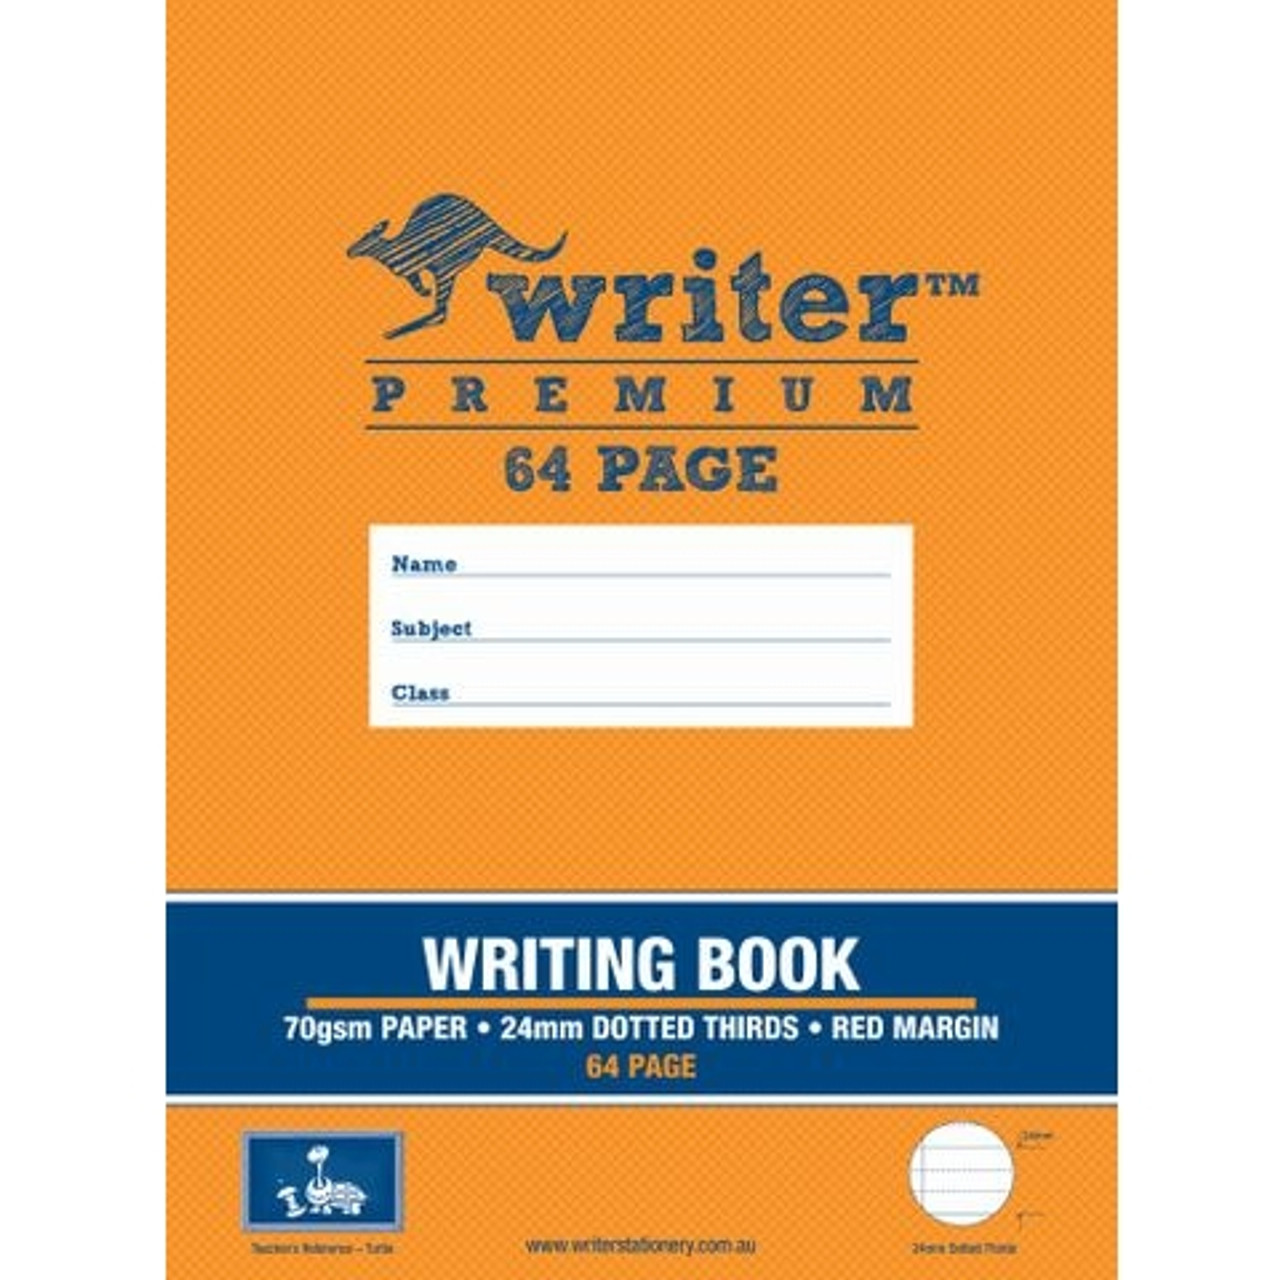 WRITER PREMIUM WRITING BOOK 64pgs 24mm Dotted Thirds - Turtle 330 x 245mm  70gsm (same as #SPP-140847 Turtle) - Melbourne Office Supplies